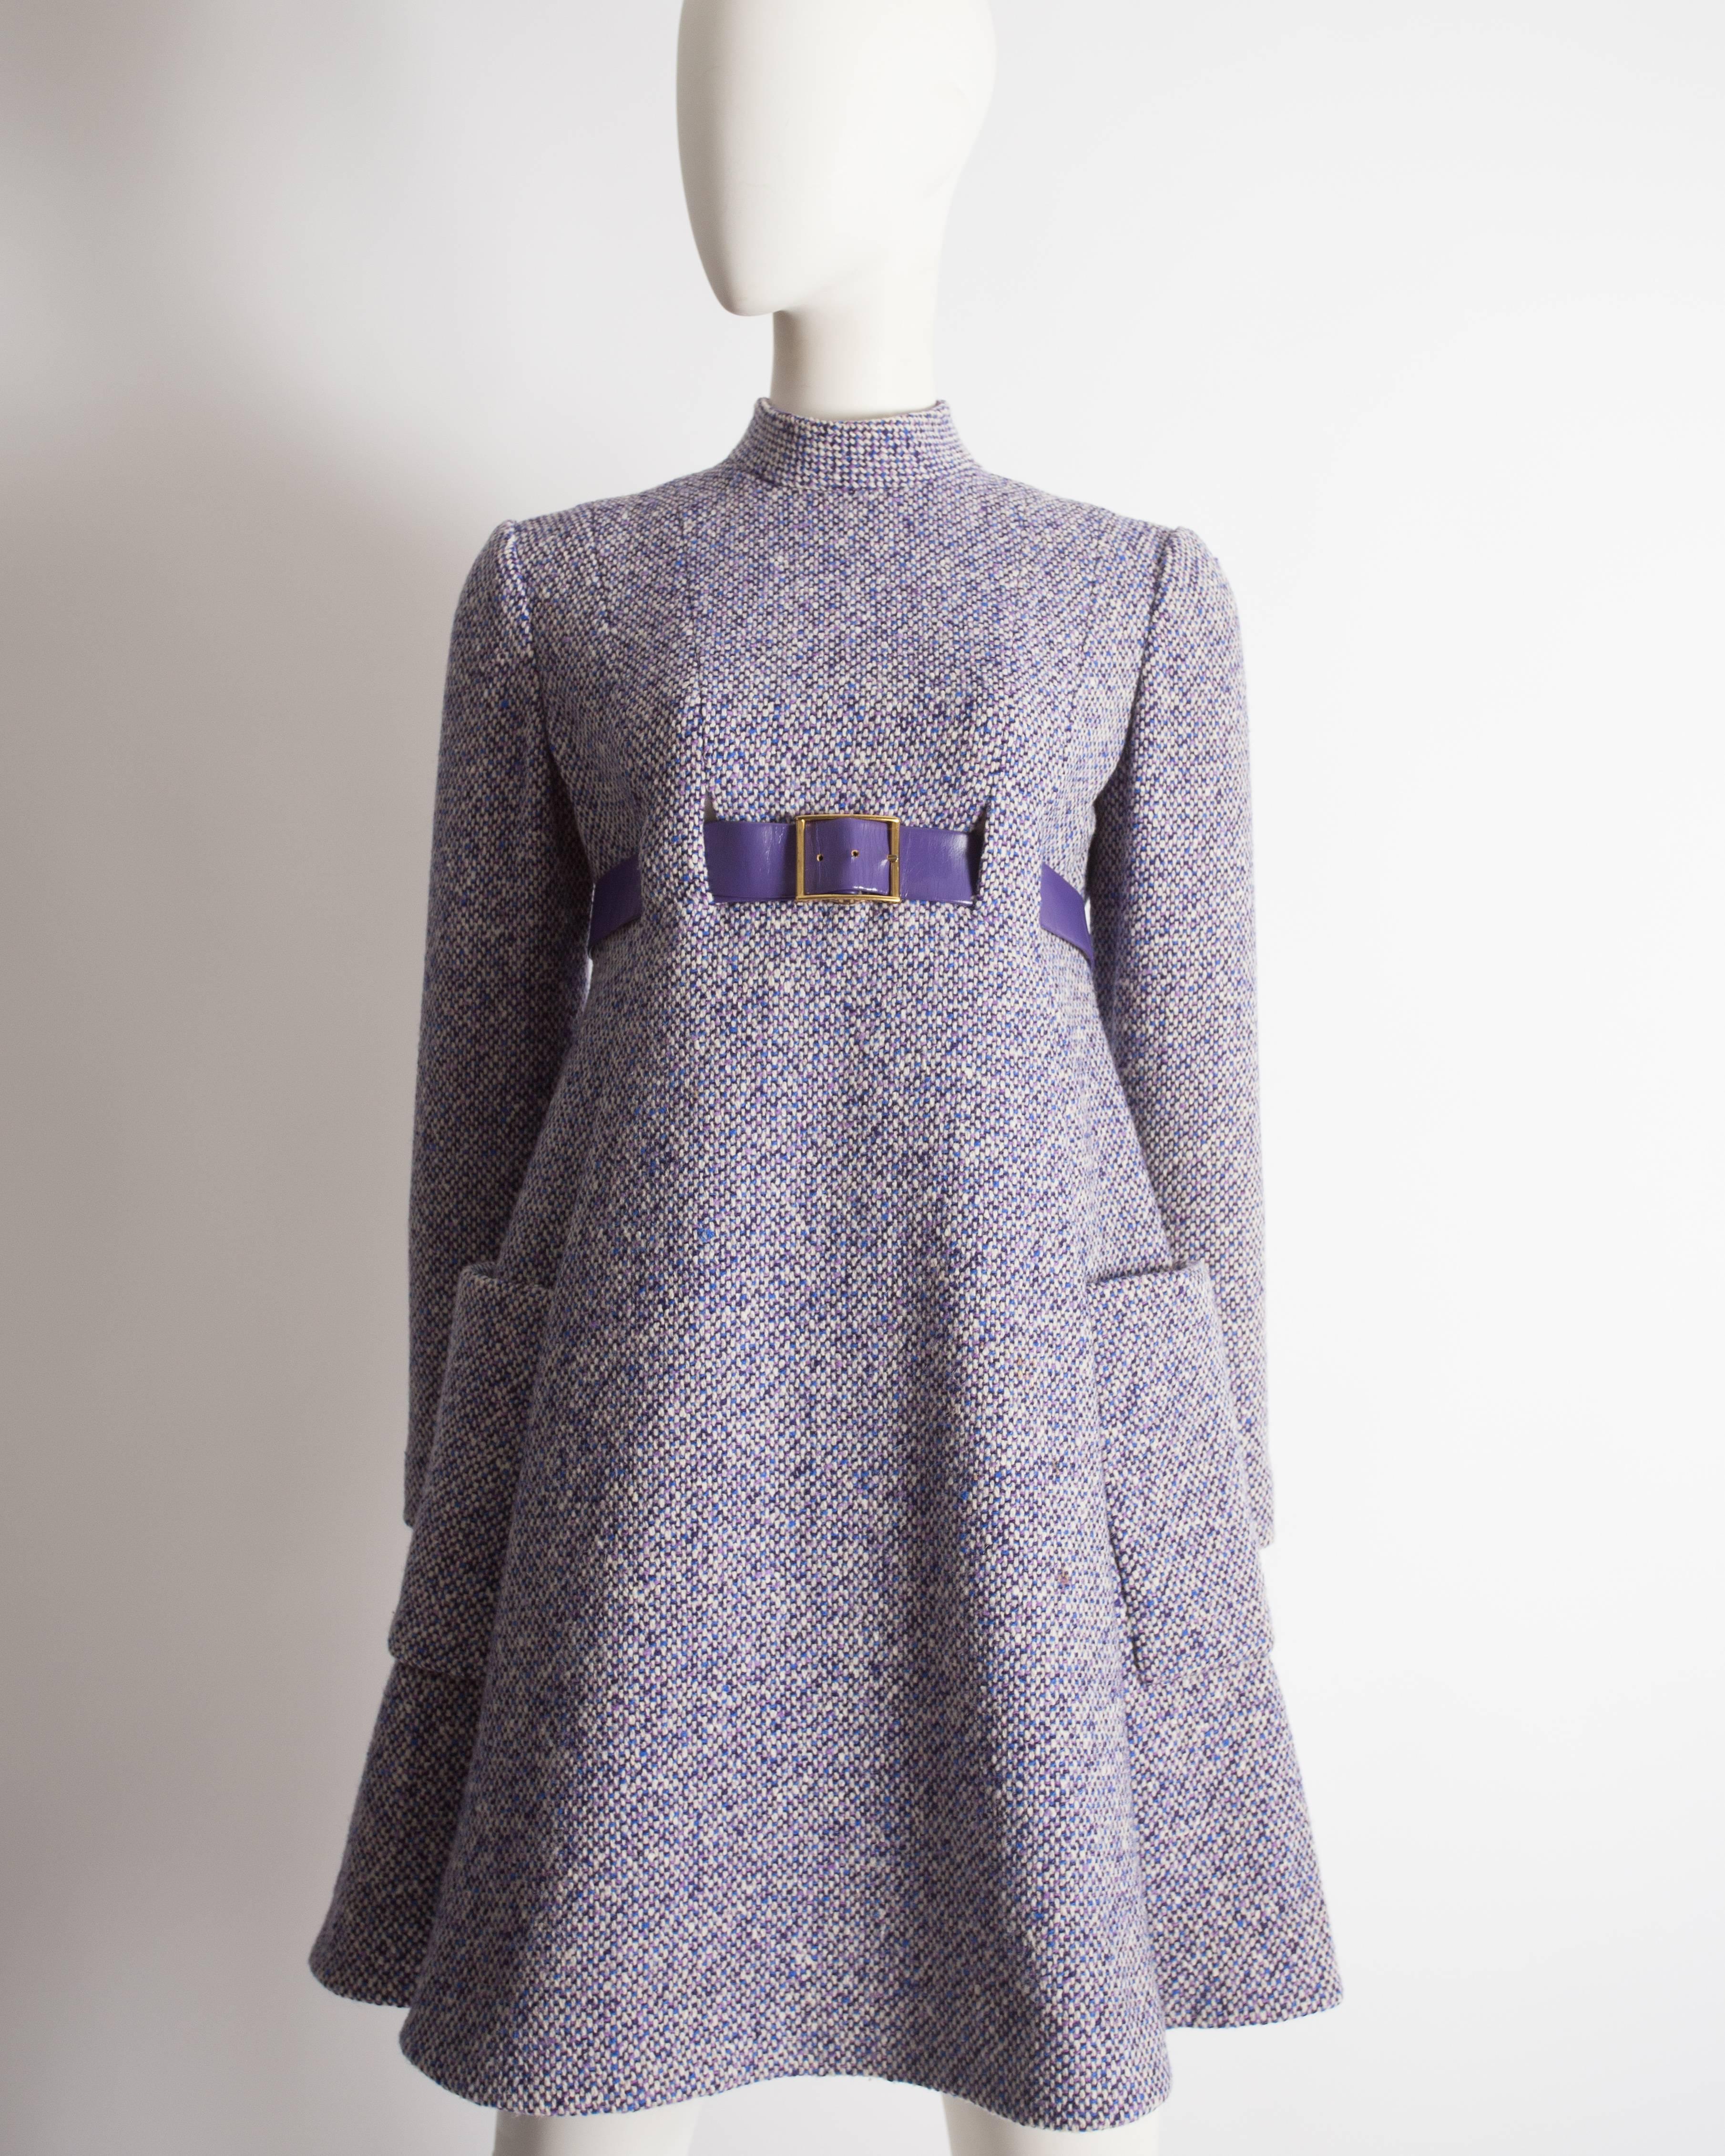 Geoffrey Beene mini dress constructed in wool tweed with a purple leather belt, box pleated skirt, two open front pockets, zip fastening at the rear and silk-satin lining. 

Circa 1965

